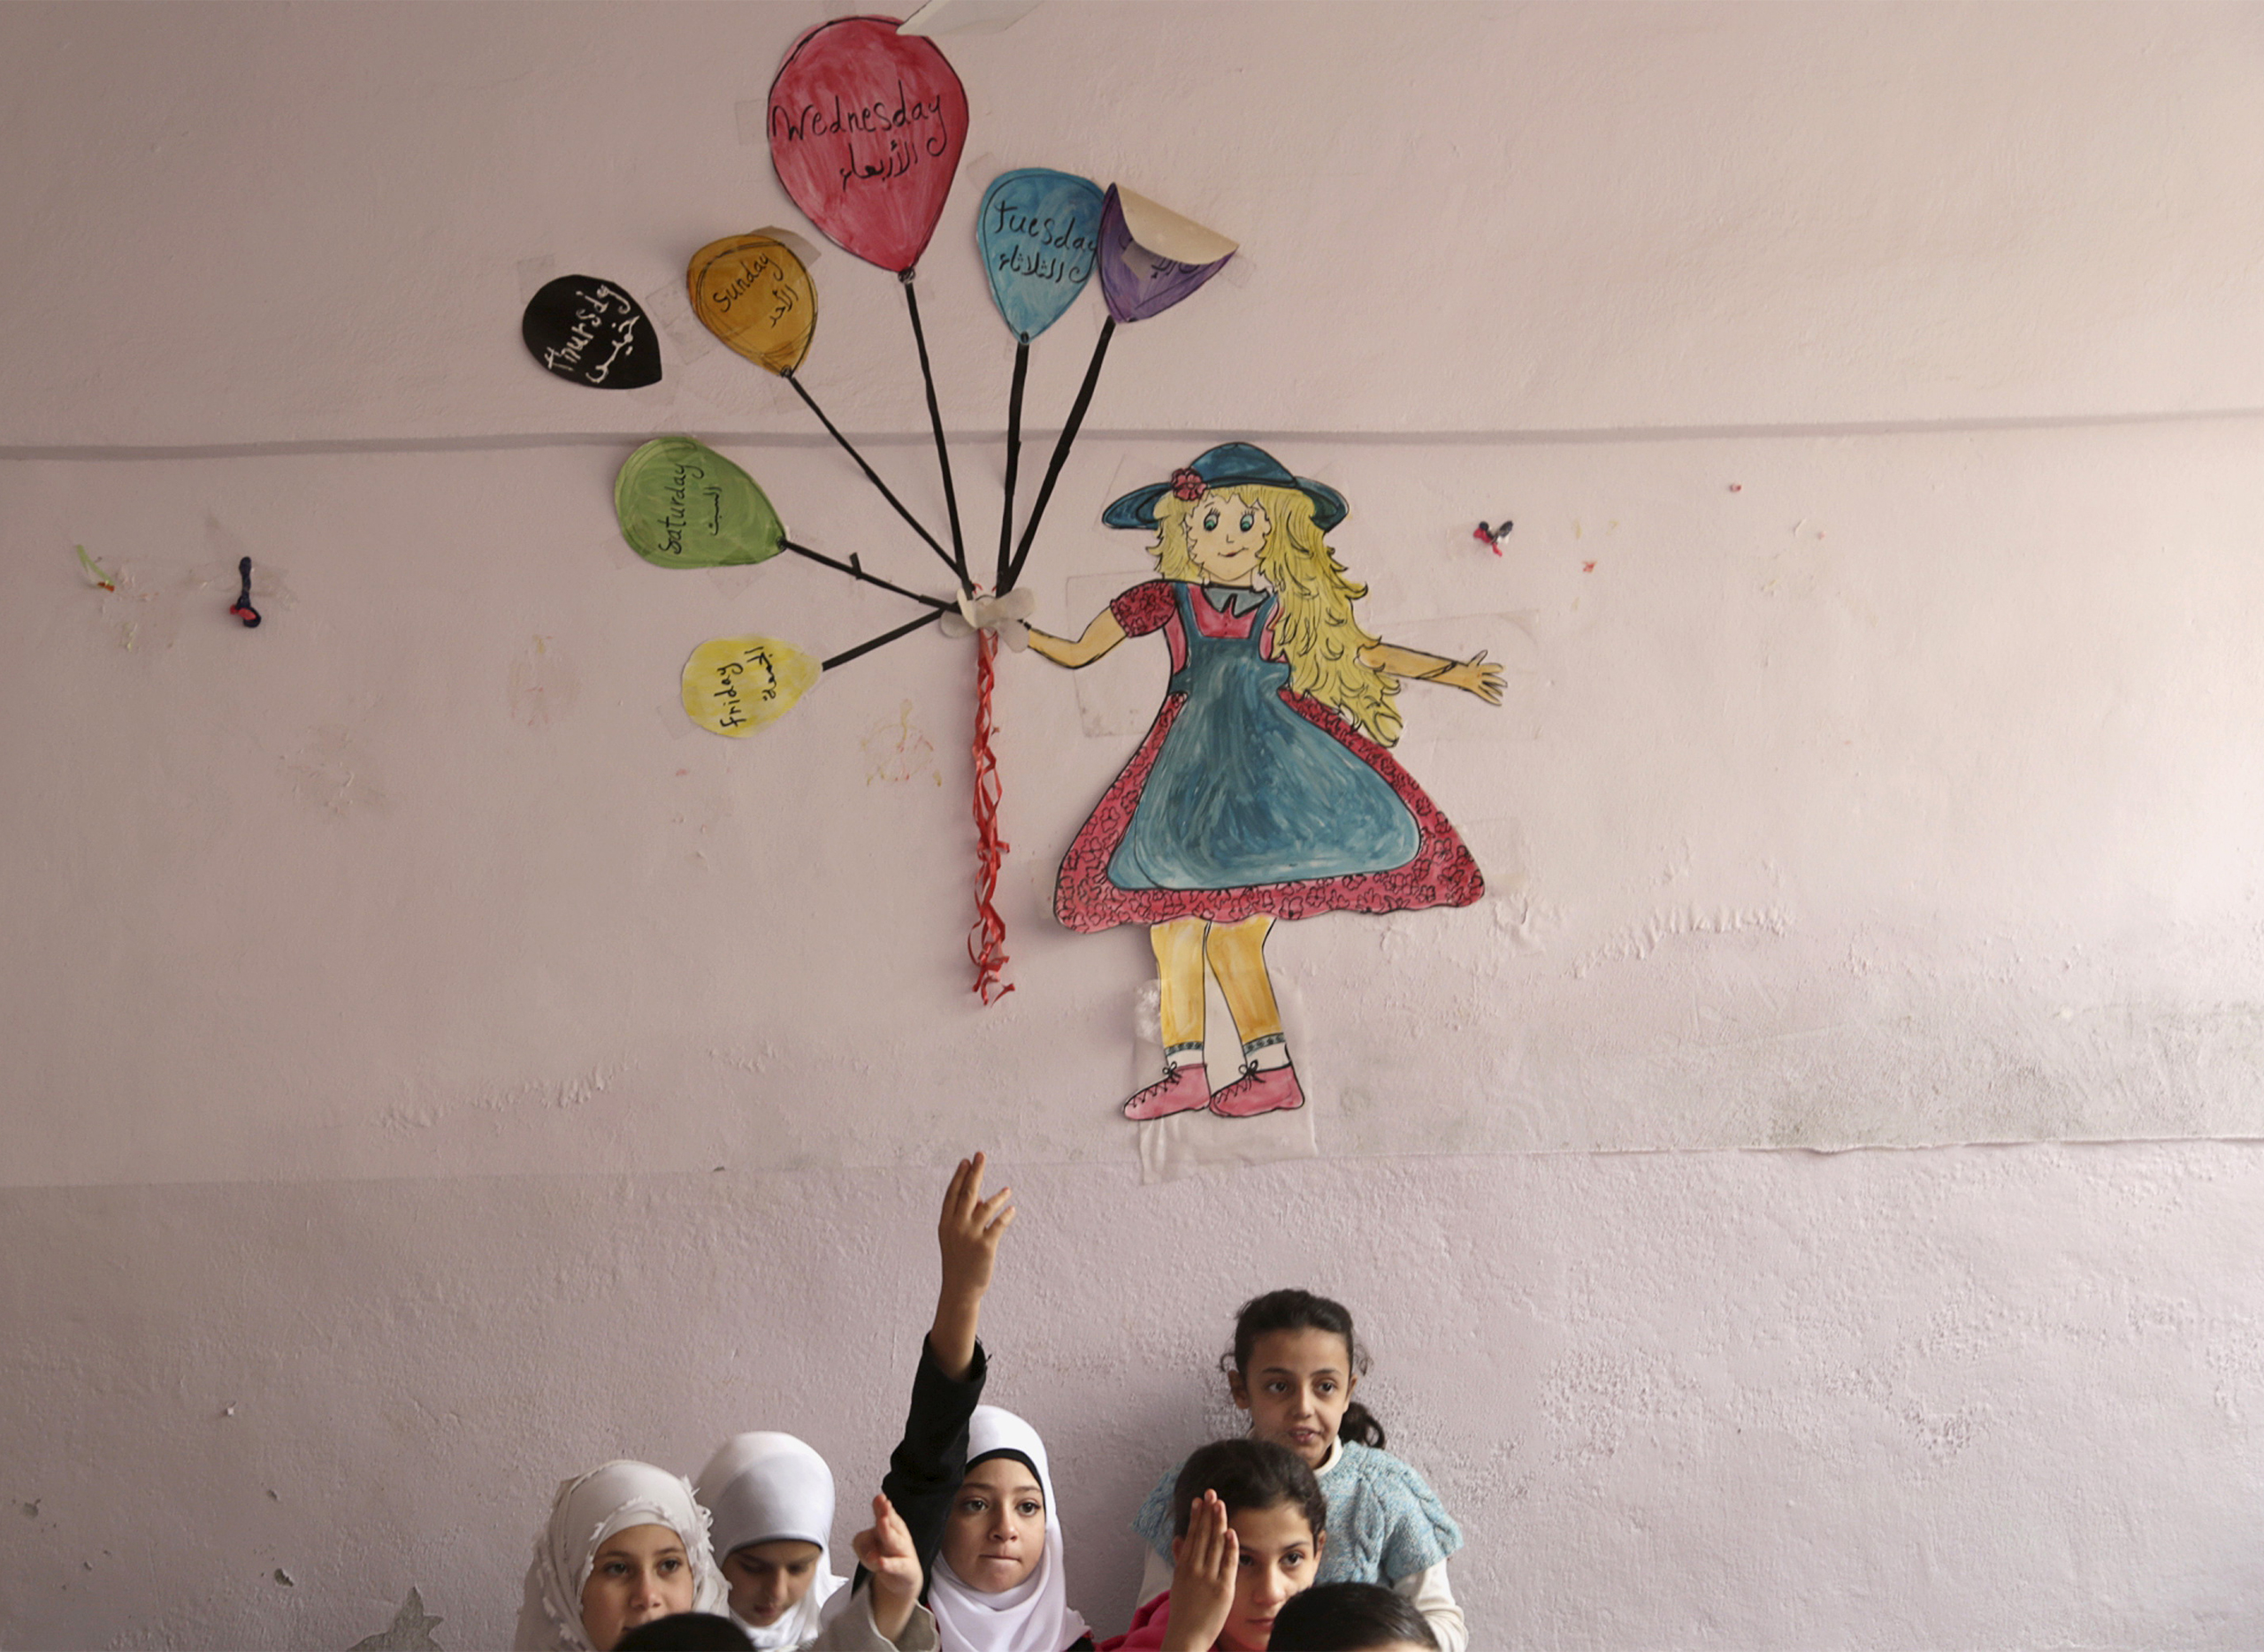 Students attend a class inside Hosam Kamel school in the rebel-controlled area of Maaret al-Numan town in Idlib province, Syria on October 28, 2015. The school, which was bombed and partially destroyed, started the new school year after restoration work was completed, activists said. (Khalil Ashawi—Reuters)